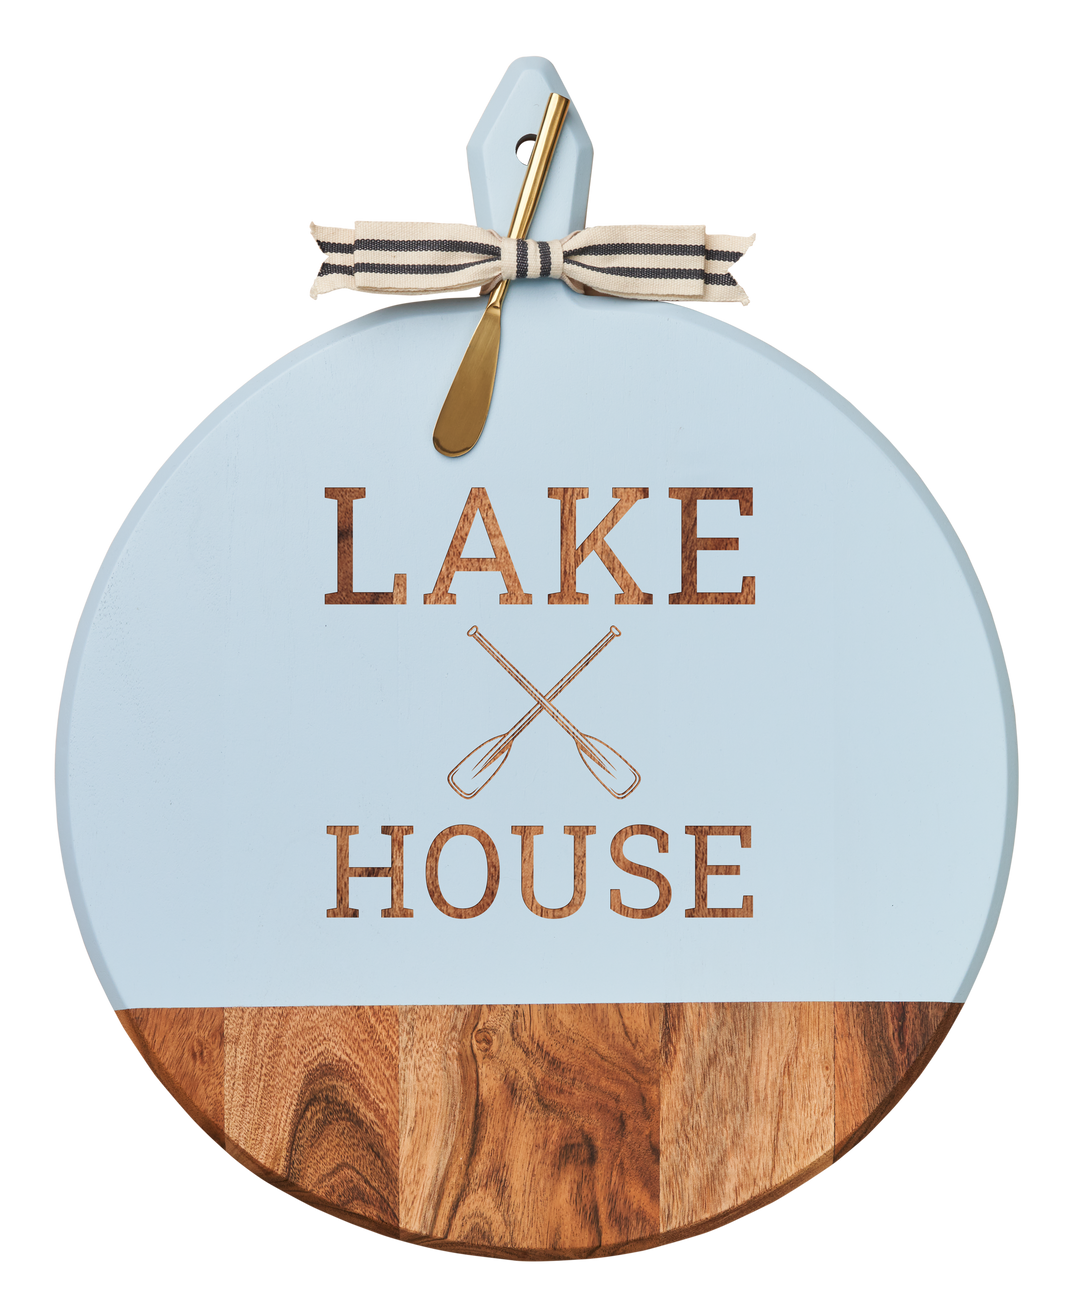 Acacia Heirloom Board with Handle Round & Gold Spreader Tied with Gray & White Ribbon | Lake House with Oars | 20 x 16"